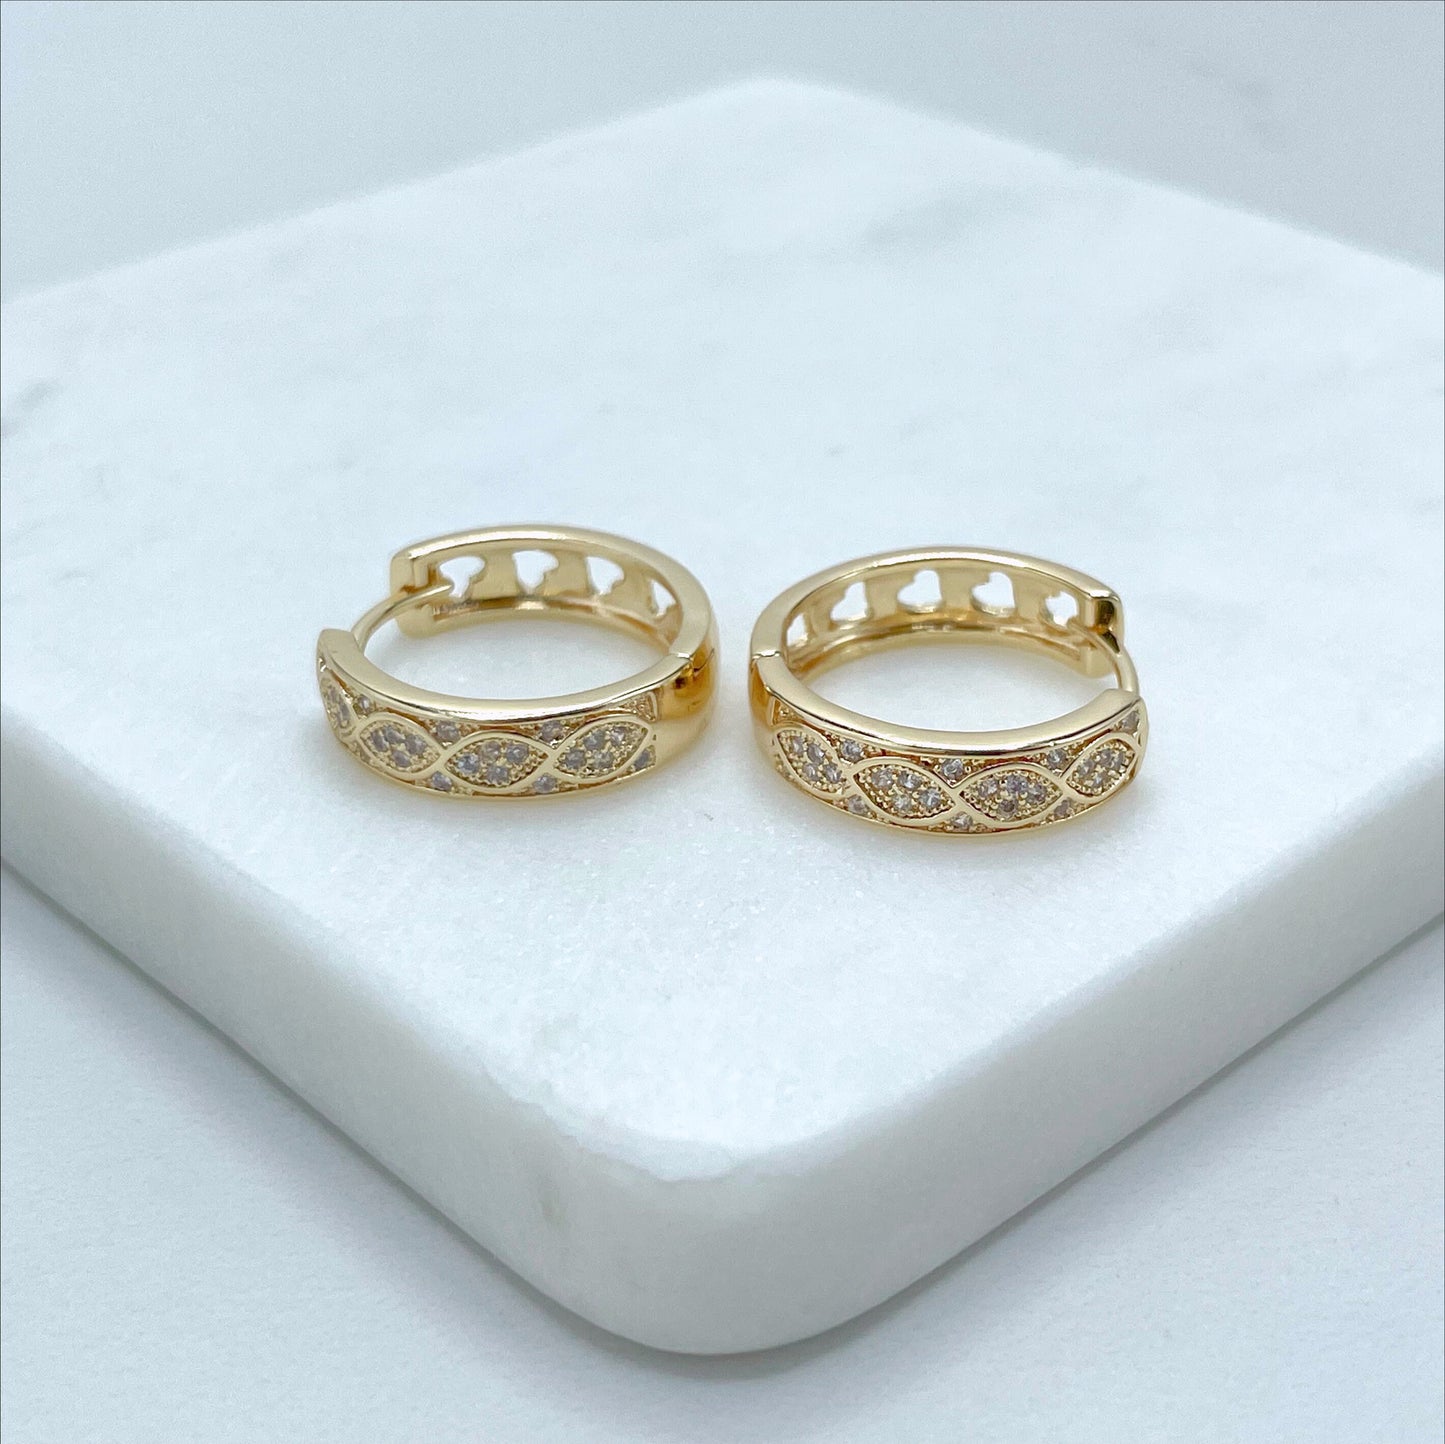 18k Gold Filled 9mm Huggie Hoops Earrings with Micro Cubic Zirconia and Hearts Cutout Back Design, Wholesale Jewelry Making Supplies